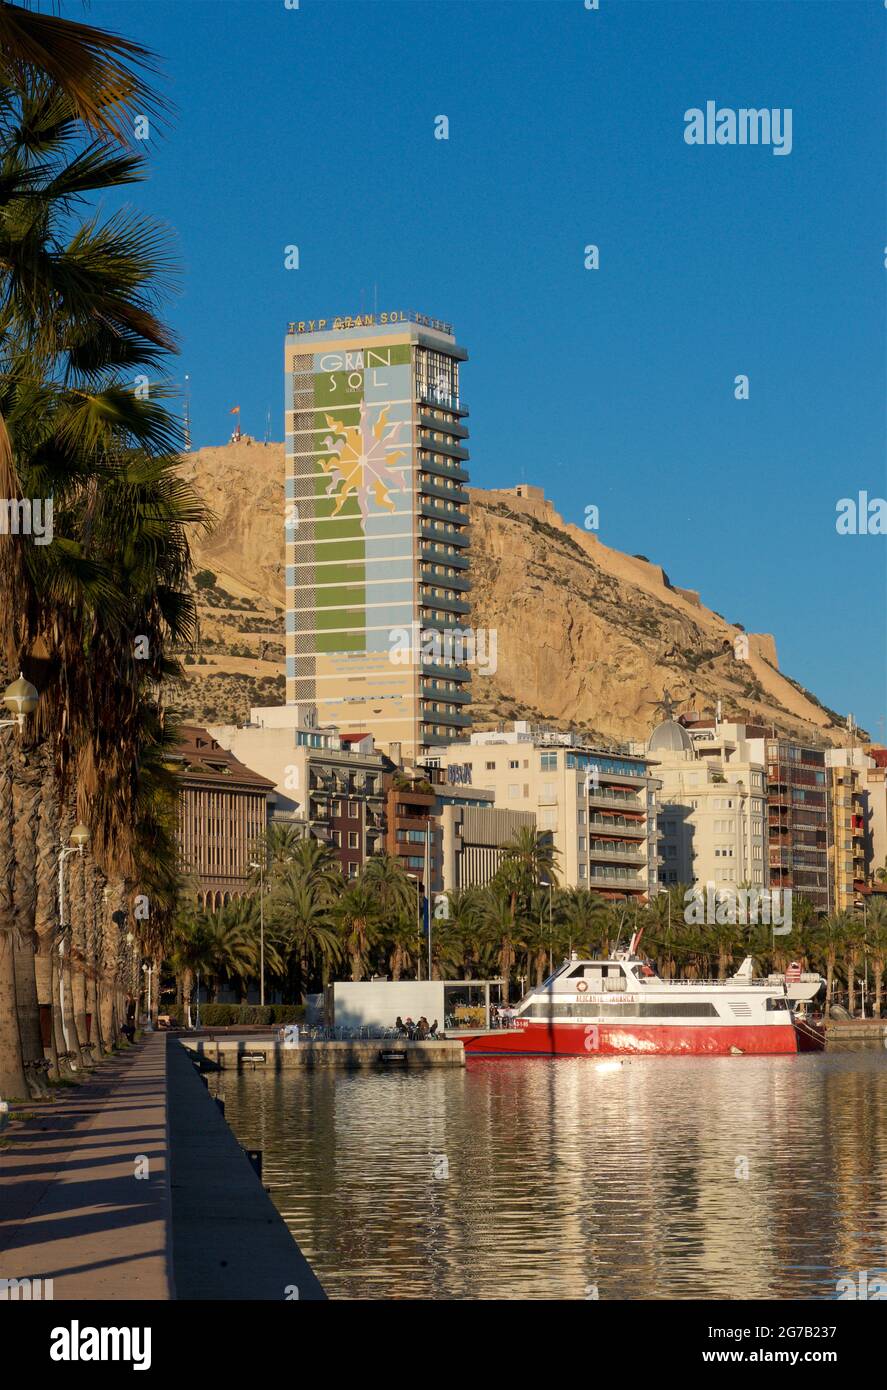 Palm-tree-lined Alicante promenade alongside the marina, Alicante, Valencia, Spain. The 97m high Gran Sol building beyond. Also known as Hotel Gran Sol, Hotel Tryp Gran Sol and officially Edificio Alonso. Mount Benacantil in the background Stock Photo